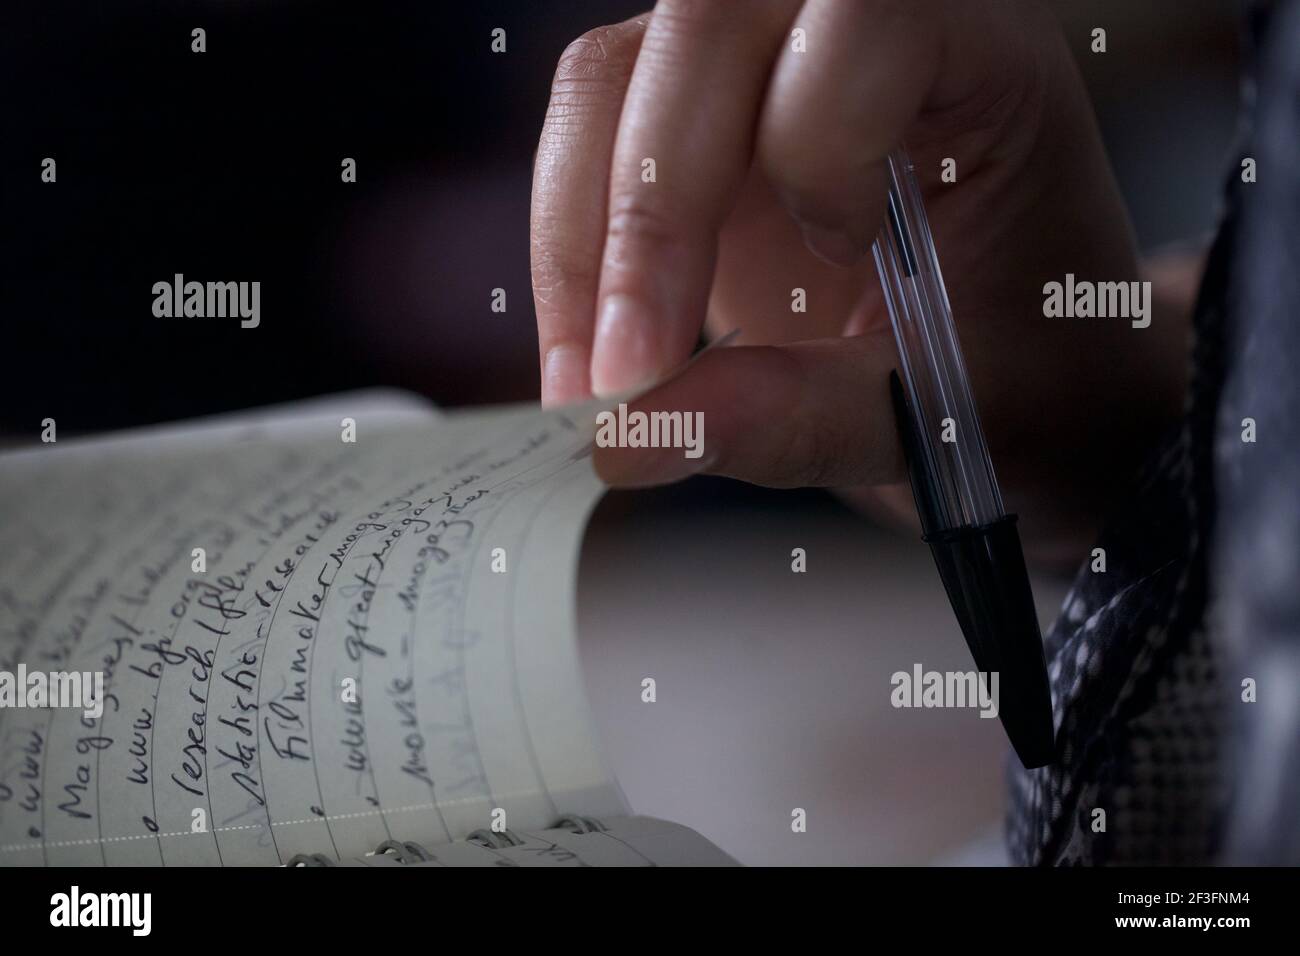 Woman`s hands writing with a pen Stock Photo